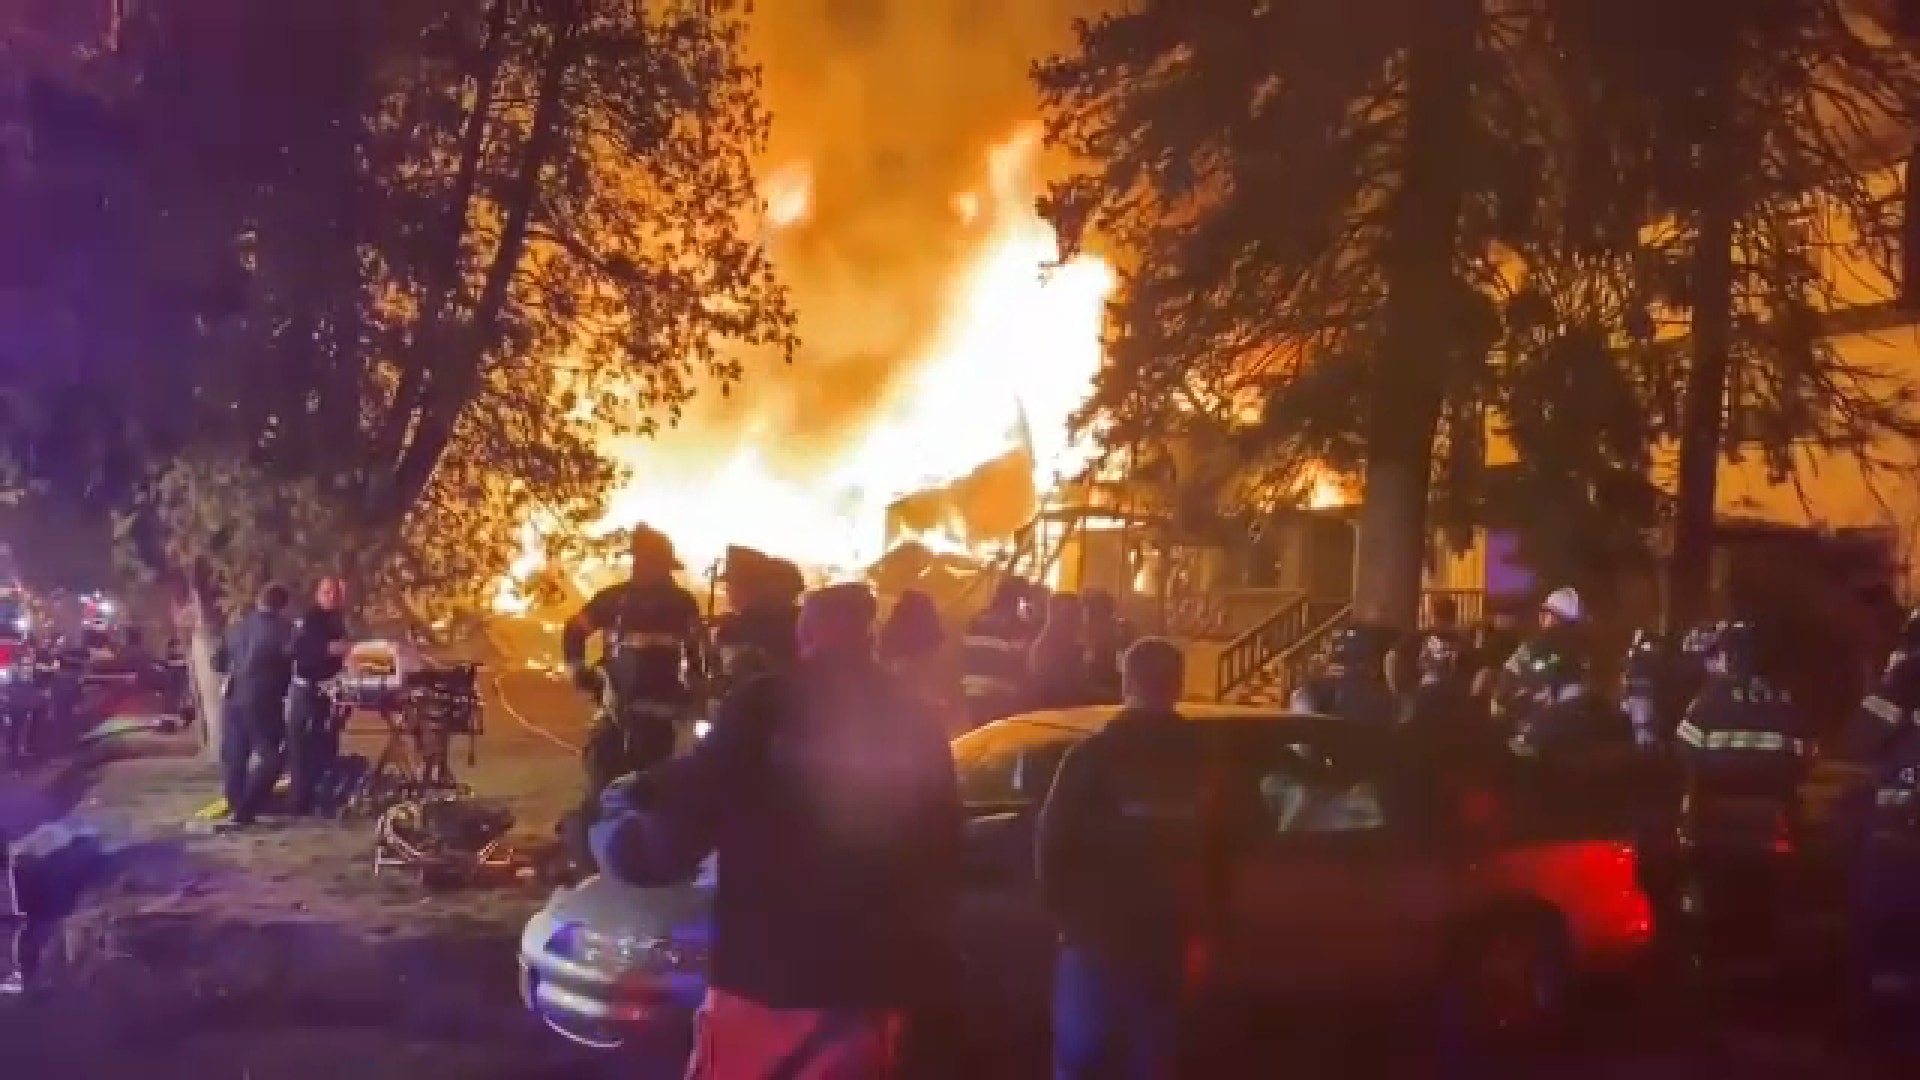 New York nursing home collapses in a massive fire;  at least 1 dead, 1 firefighter missing